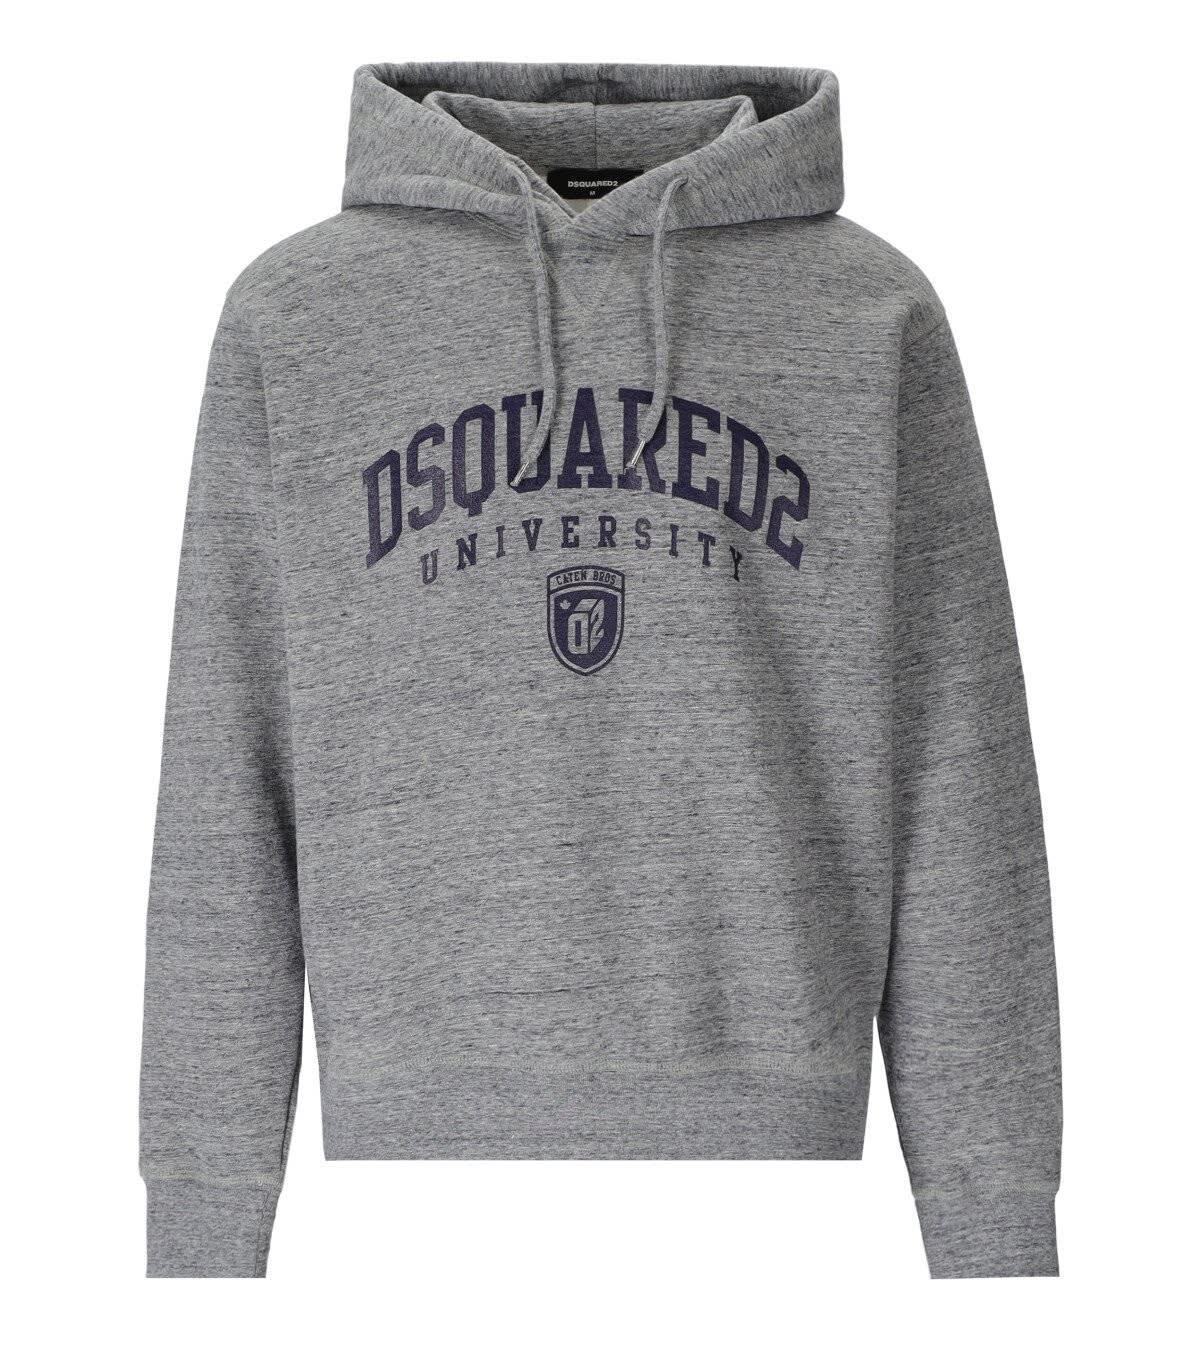 DSQUARED2 Red ICON Logo Sweatshirt - Sweatshirts from Brother2Brother UK